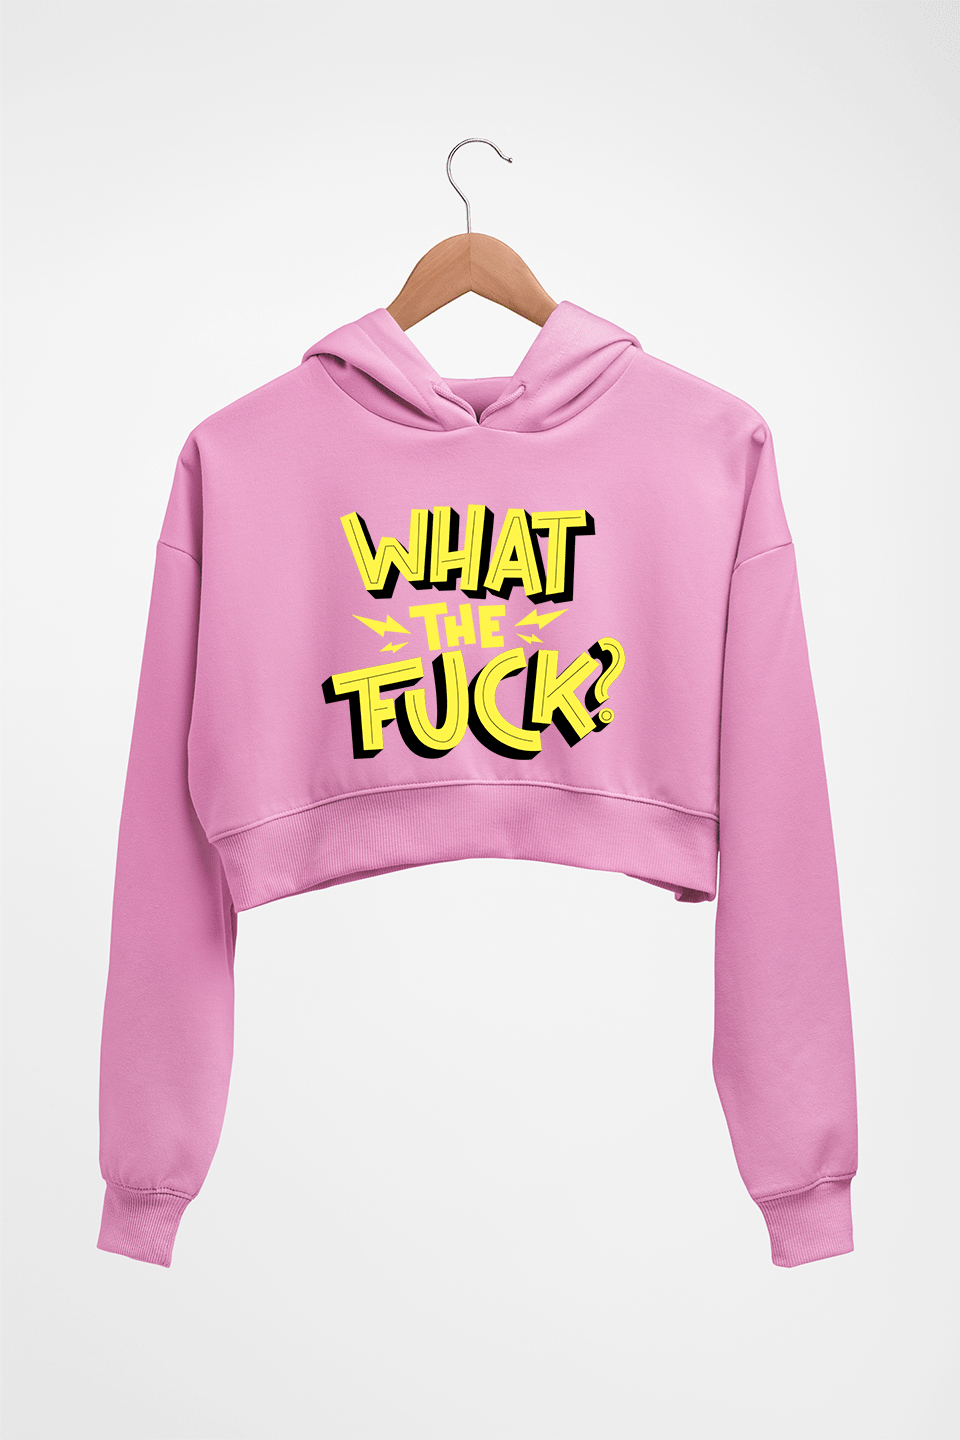 What The Fuck Crop HOODIE FOR WOMEN